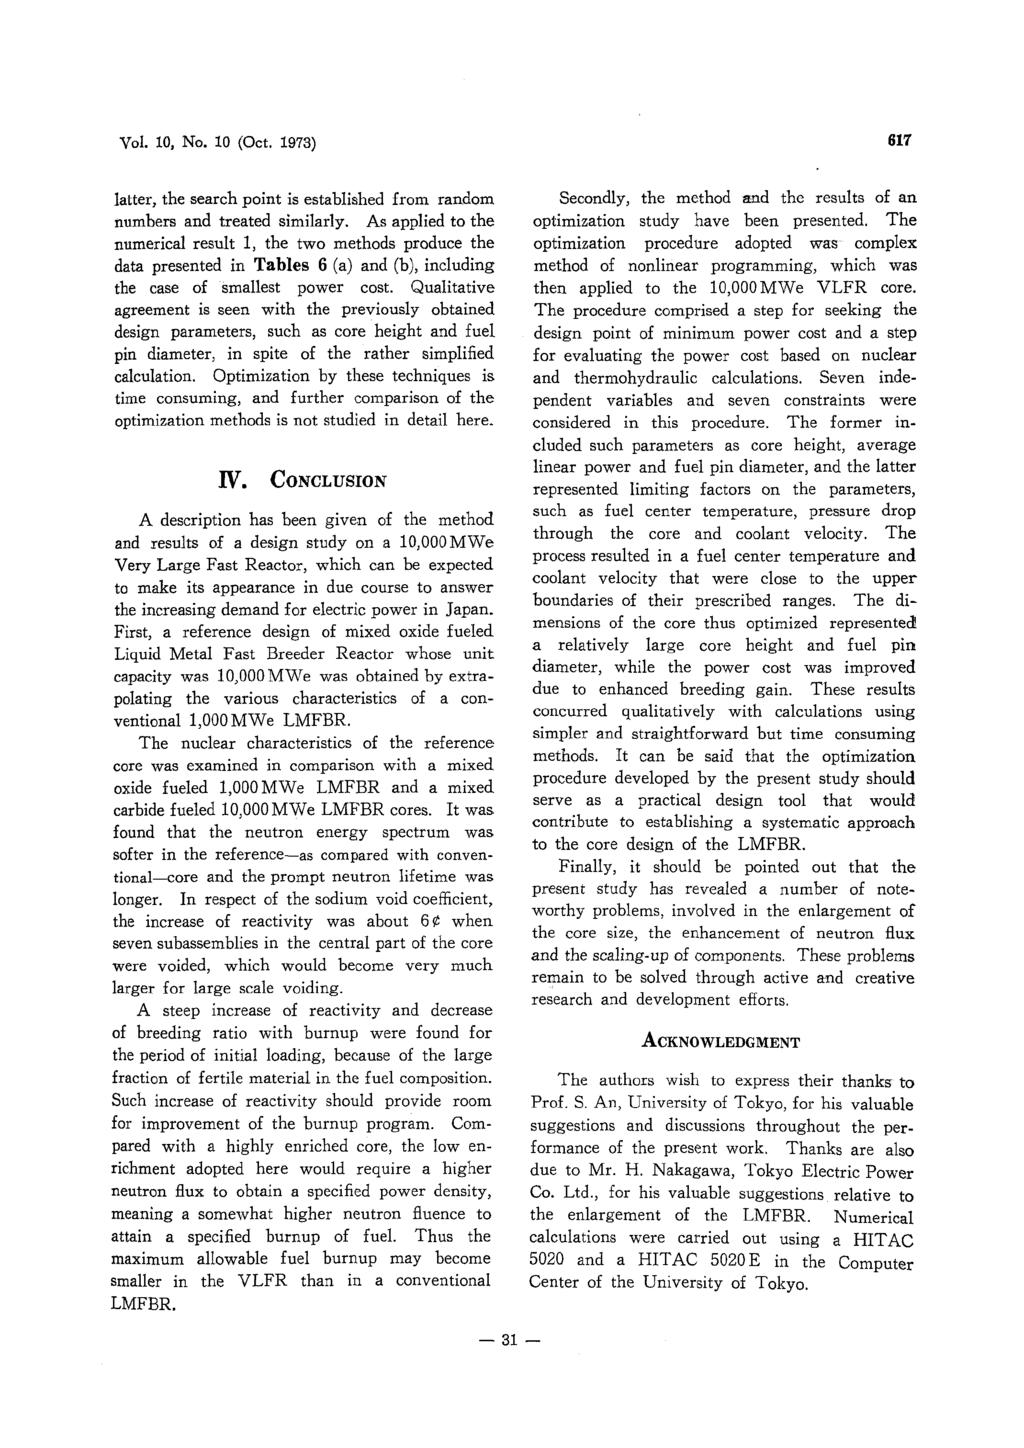 Vol. 10, No. 10 (Oct. 1973) latter, the search point is established from random numbers and treated similarly.